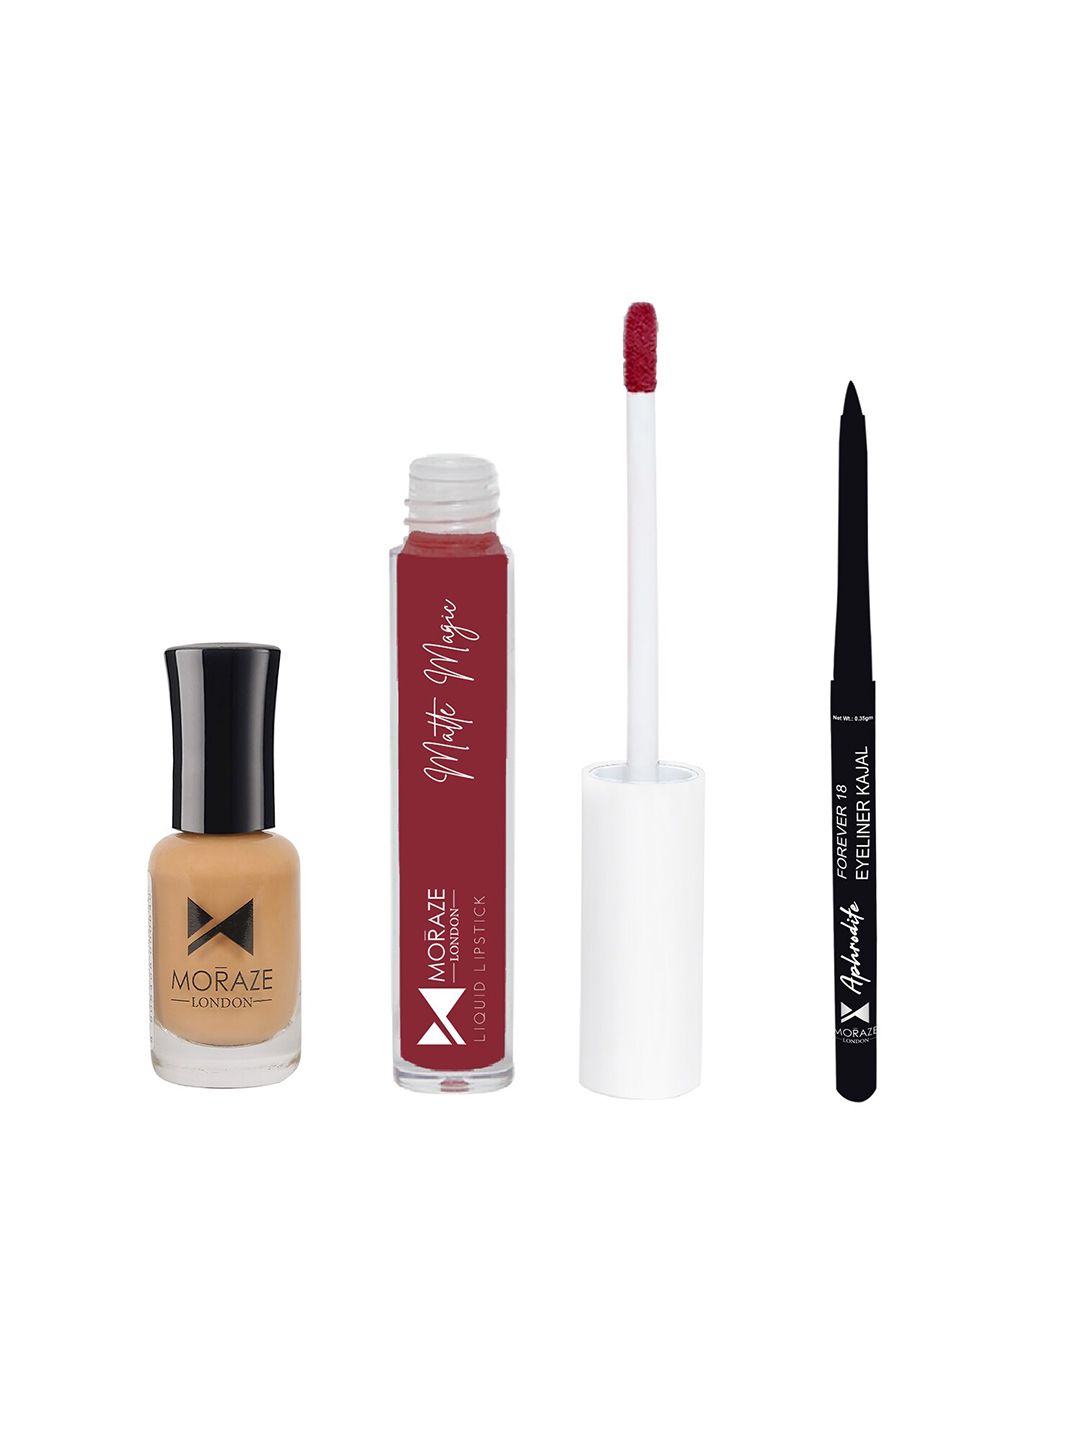 Moraze Pack Of Nude Nail Polish (Beige) With Lipstick (No Regret) and Kajal Price in India